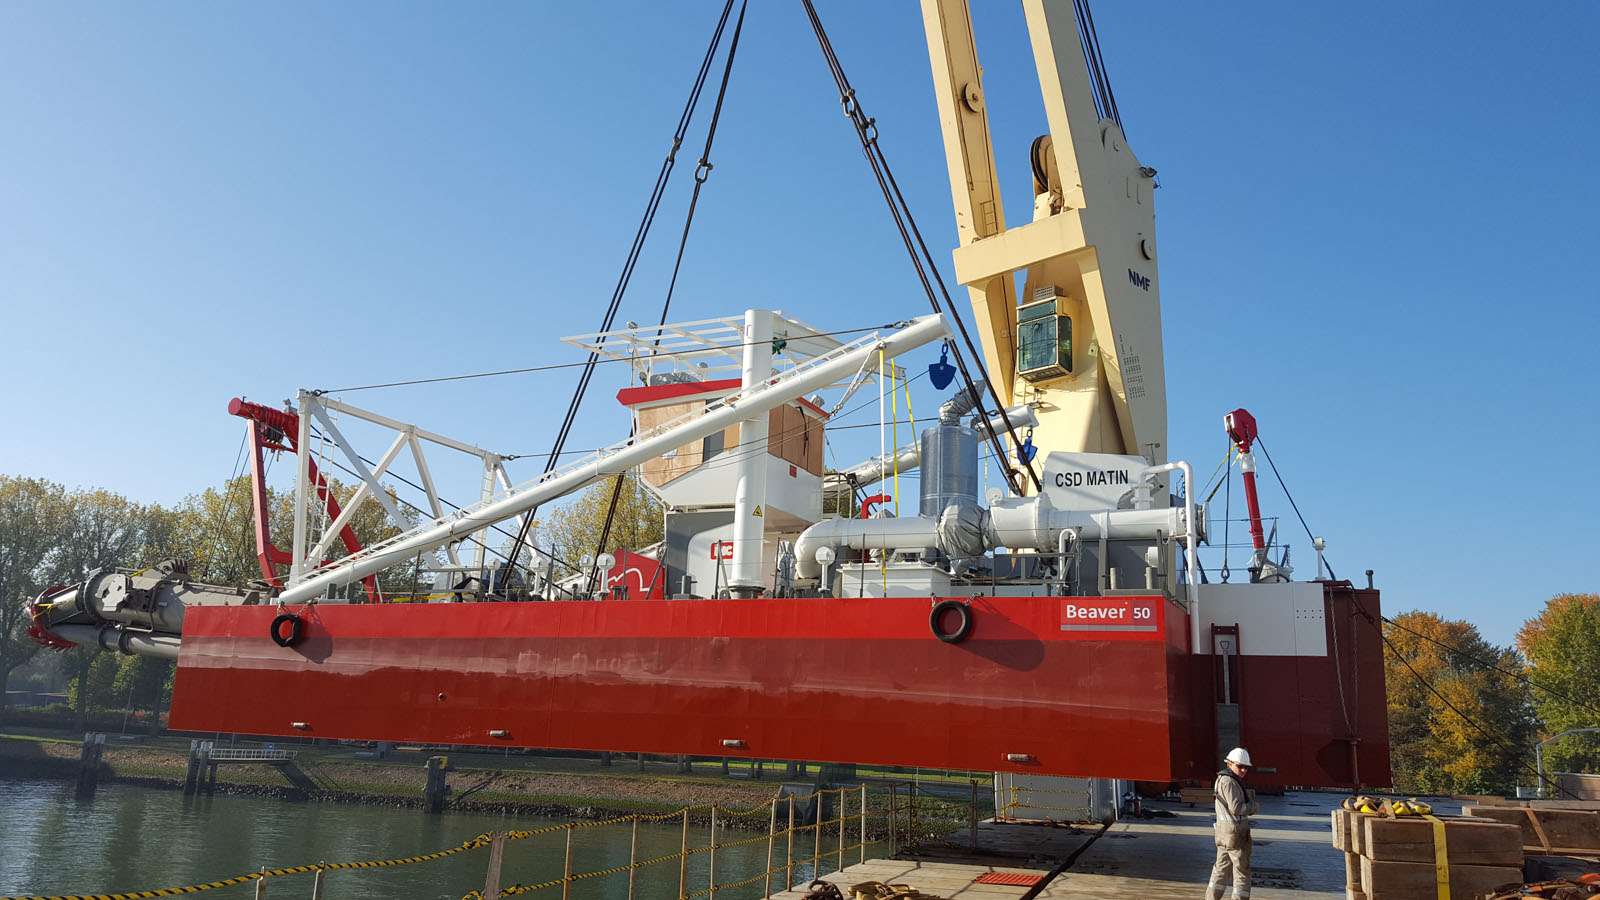 DBL Group Bangladesh enters dredging market with IHC Beavers® and work boats